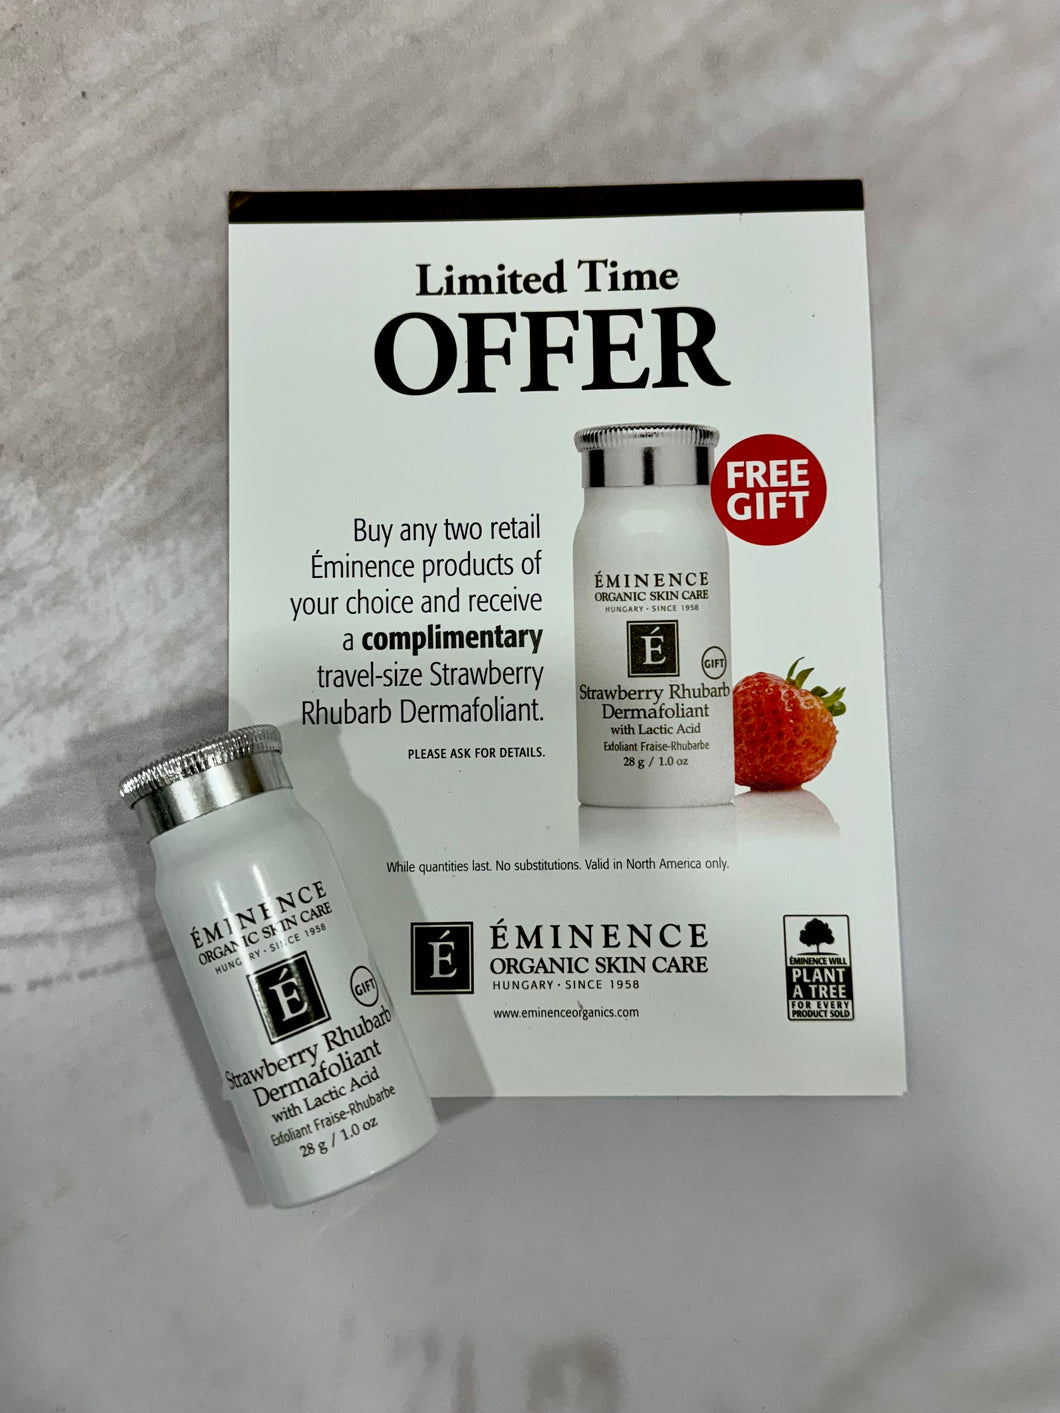 GIFT WITH PURCHASE: Strawberry Rhubarb Dermafoliant